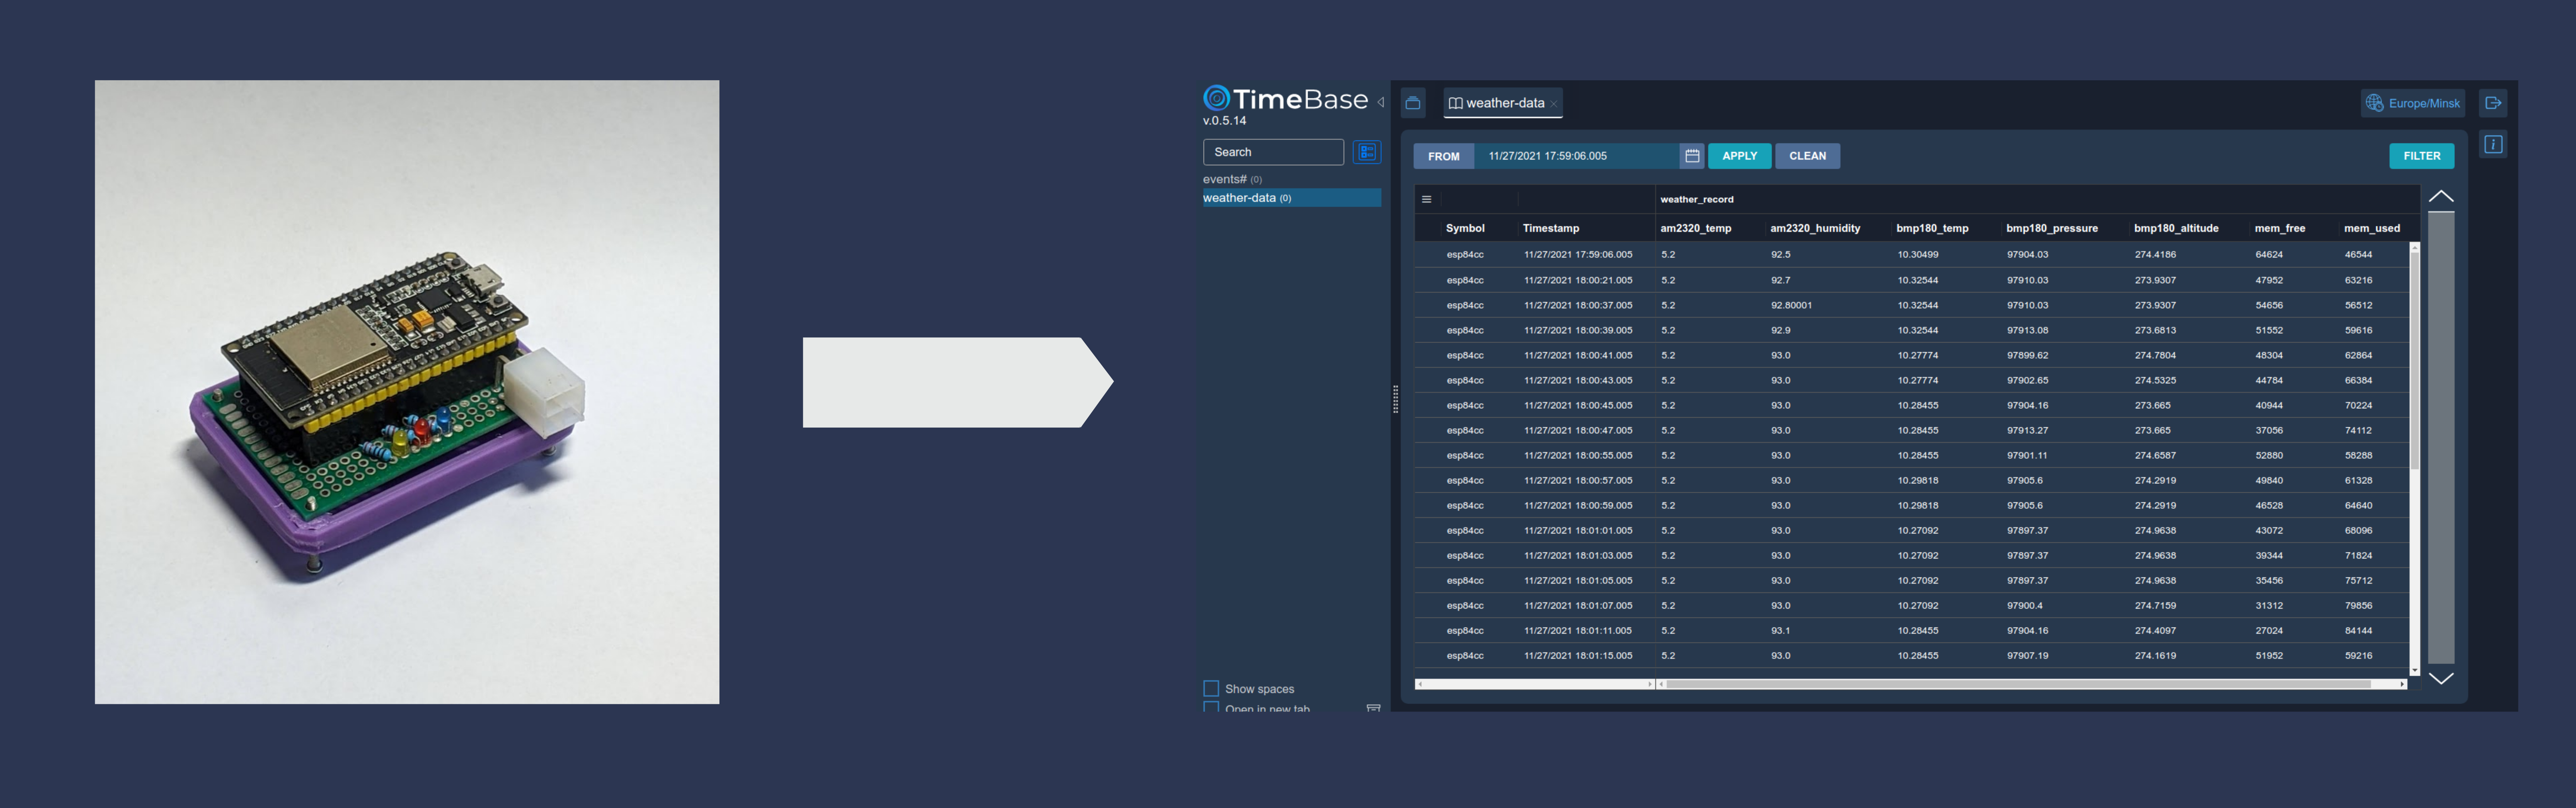 Using TimeBase as Data Storage For IoT Devices